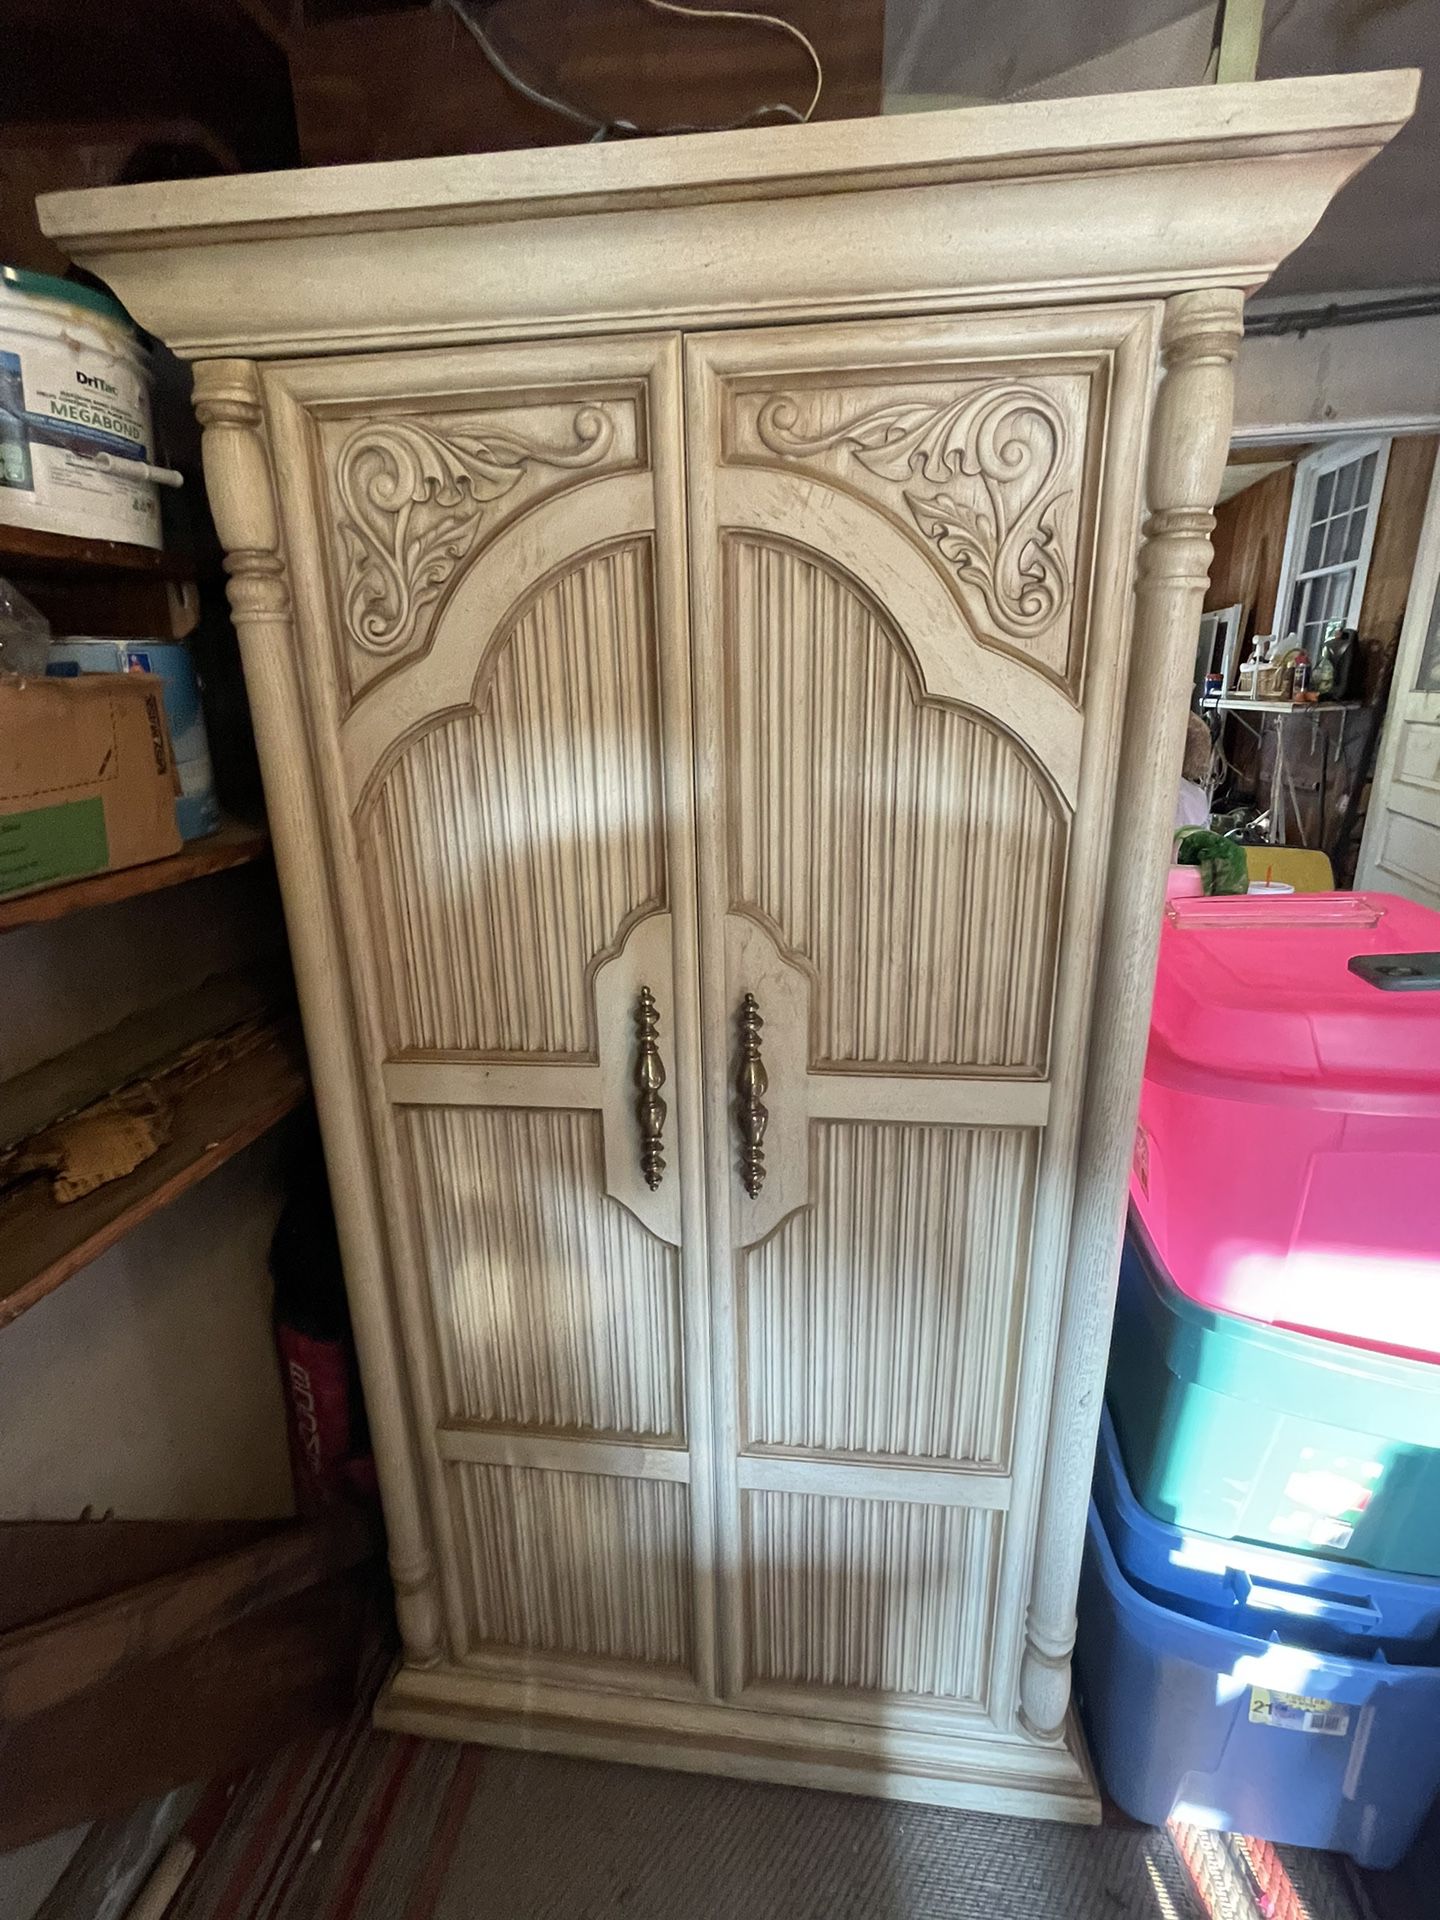 Armoire Type Bar Cabinet 